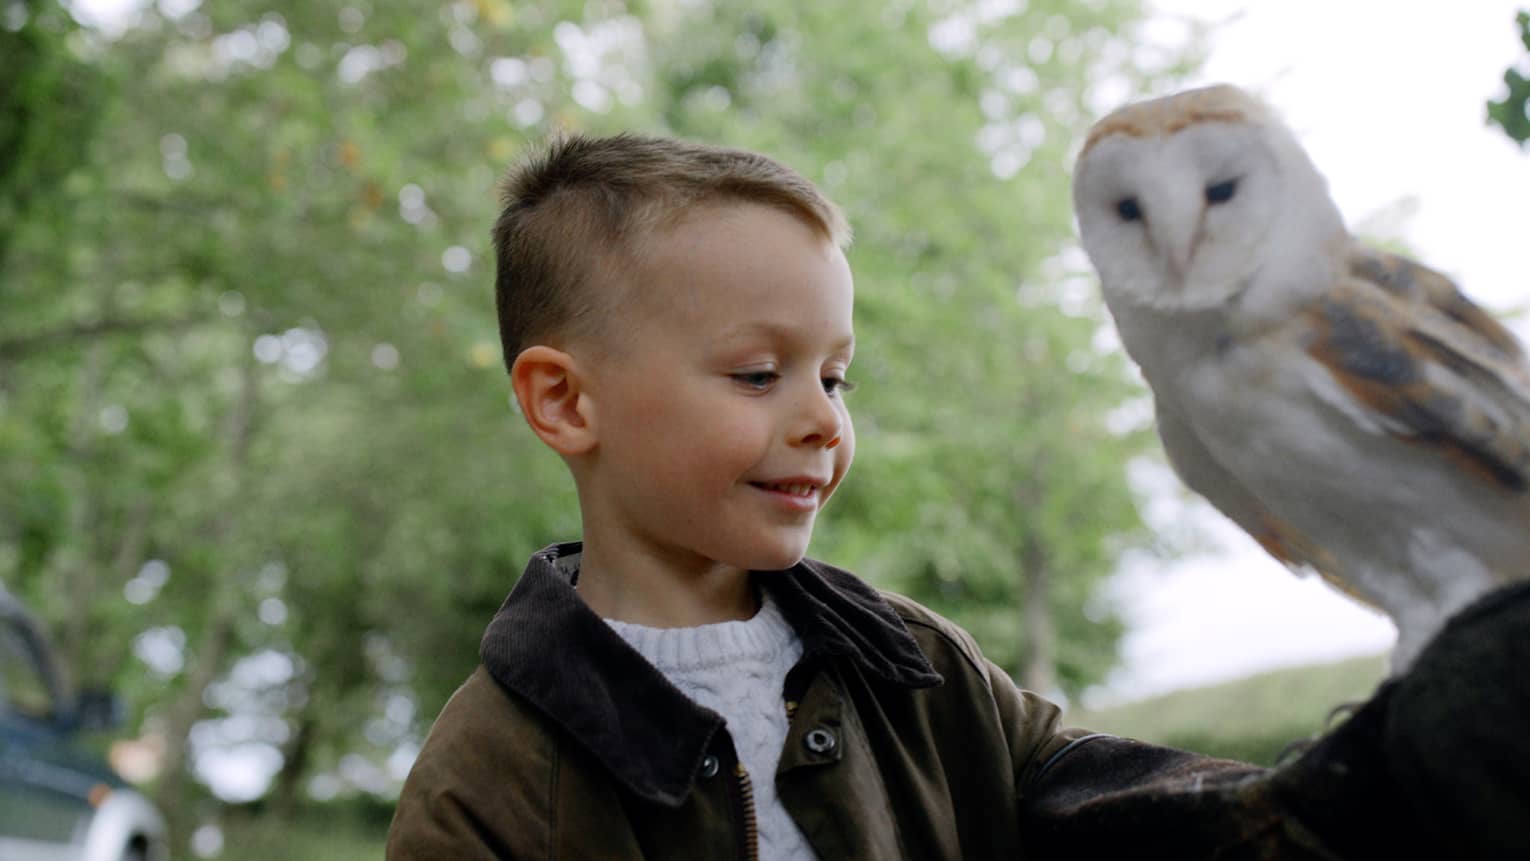 Child smiling with white owl perched on his forearm